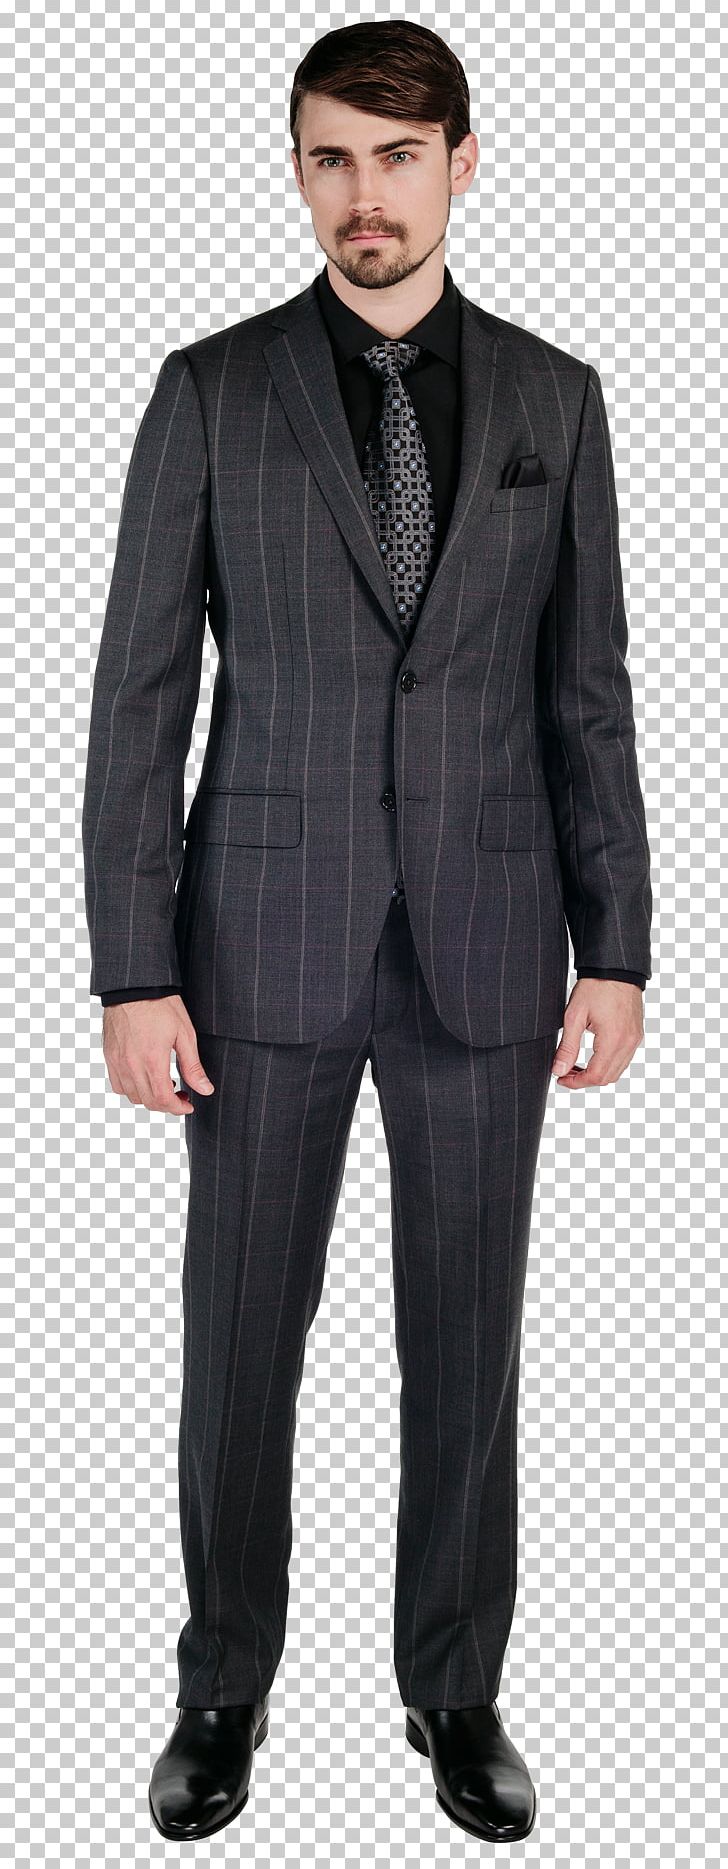 Suit Formal Wear Tuxedo Clothing Blazer PNG, Clipart, Blazer, Businessperson, Casual, Clothing, Clothing Accessories Free PNG Download